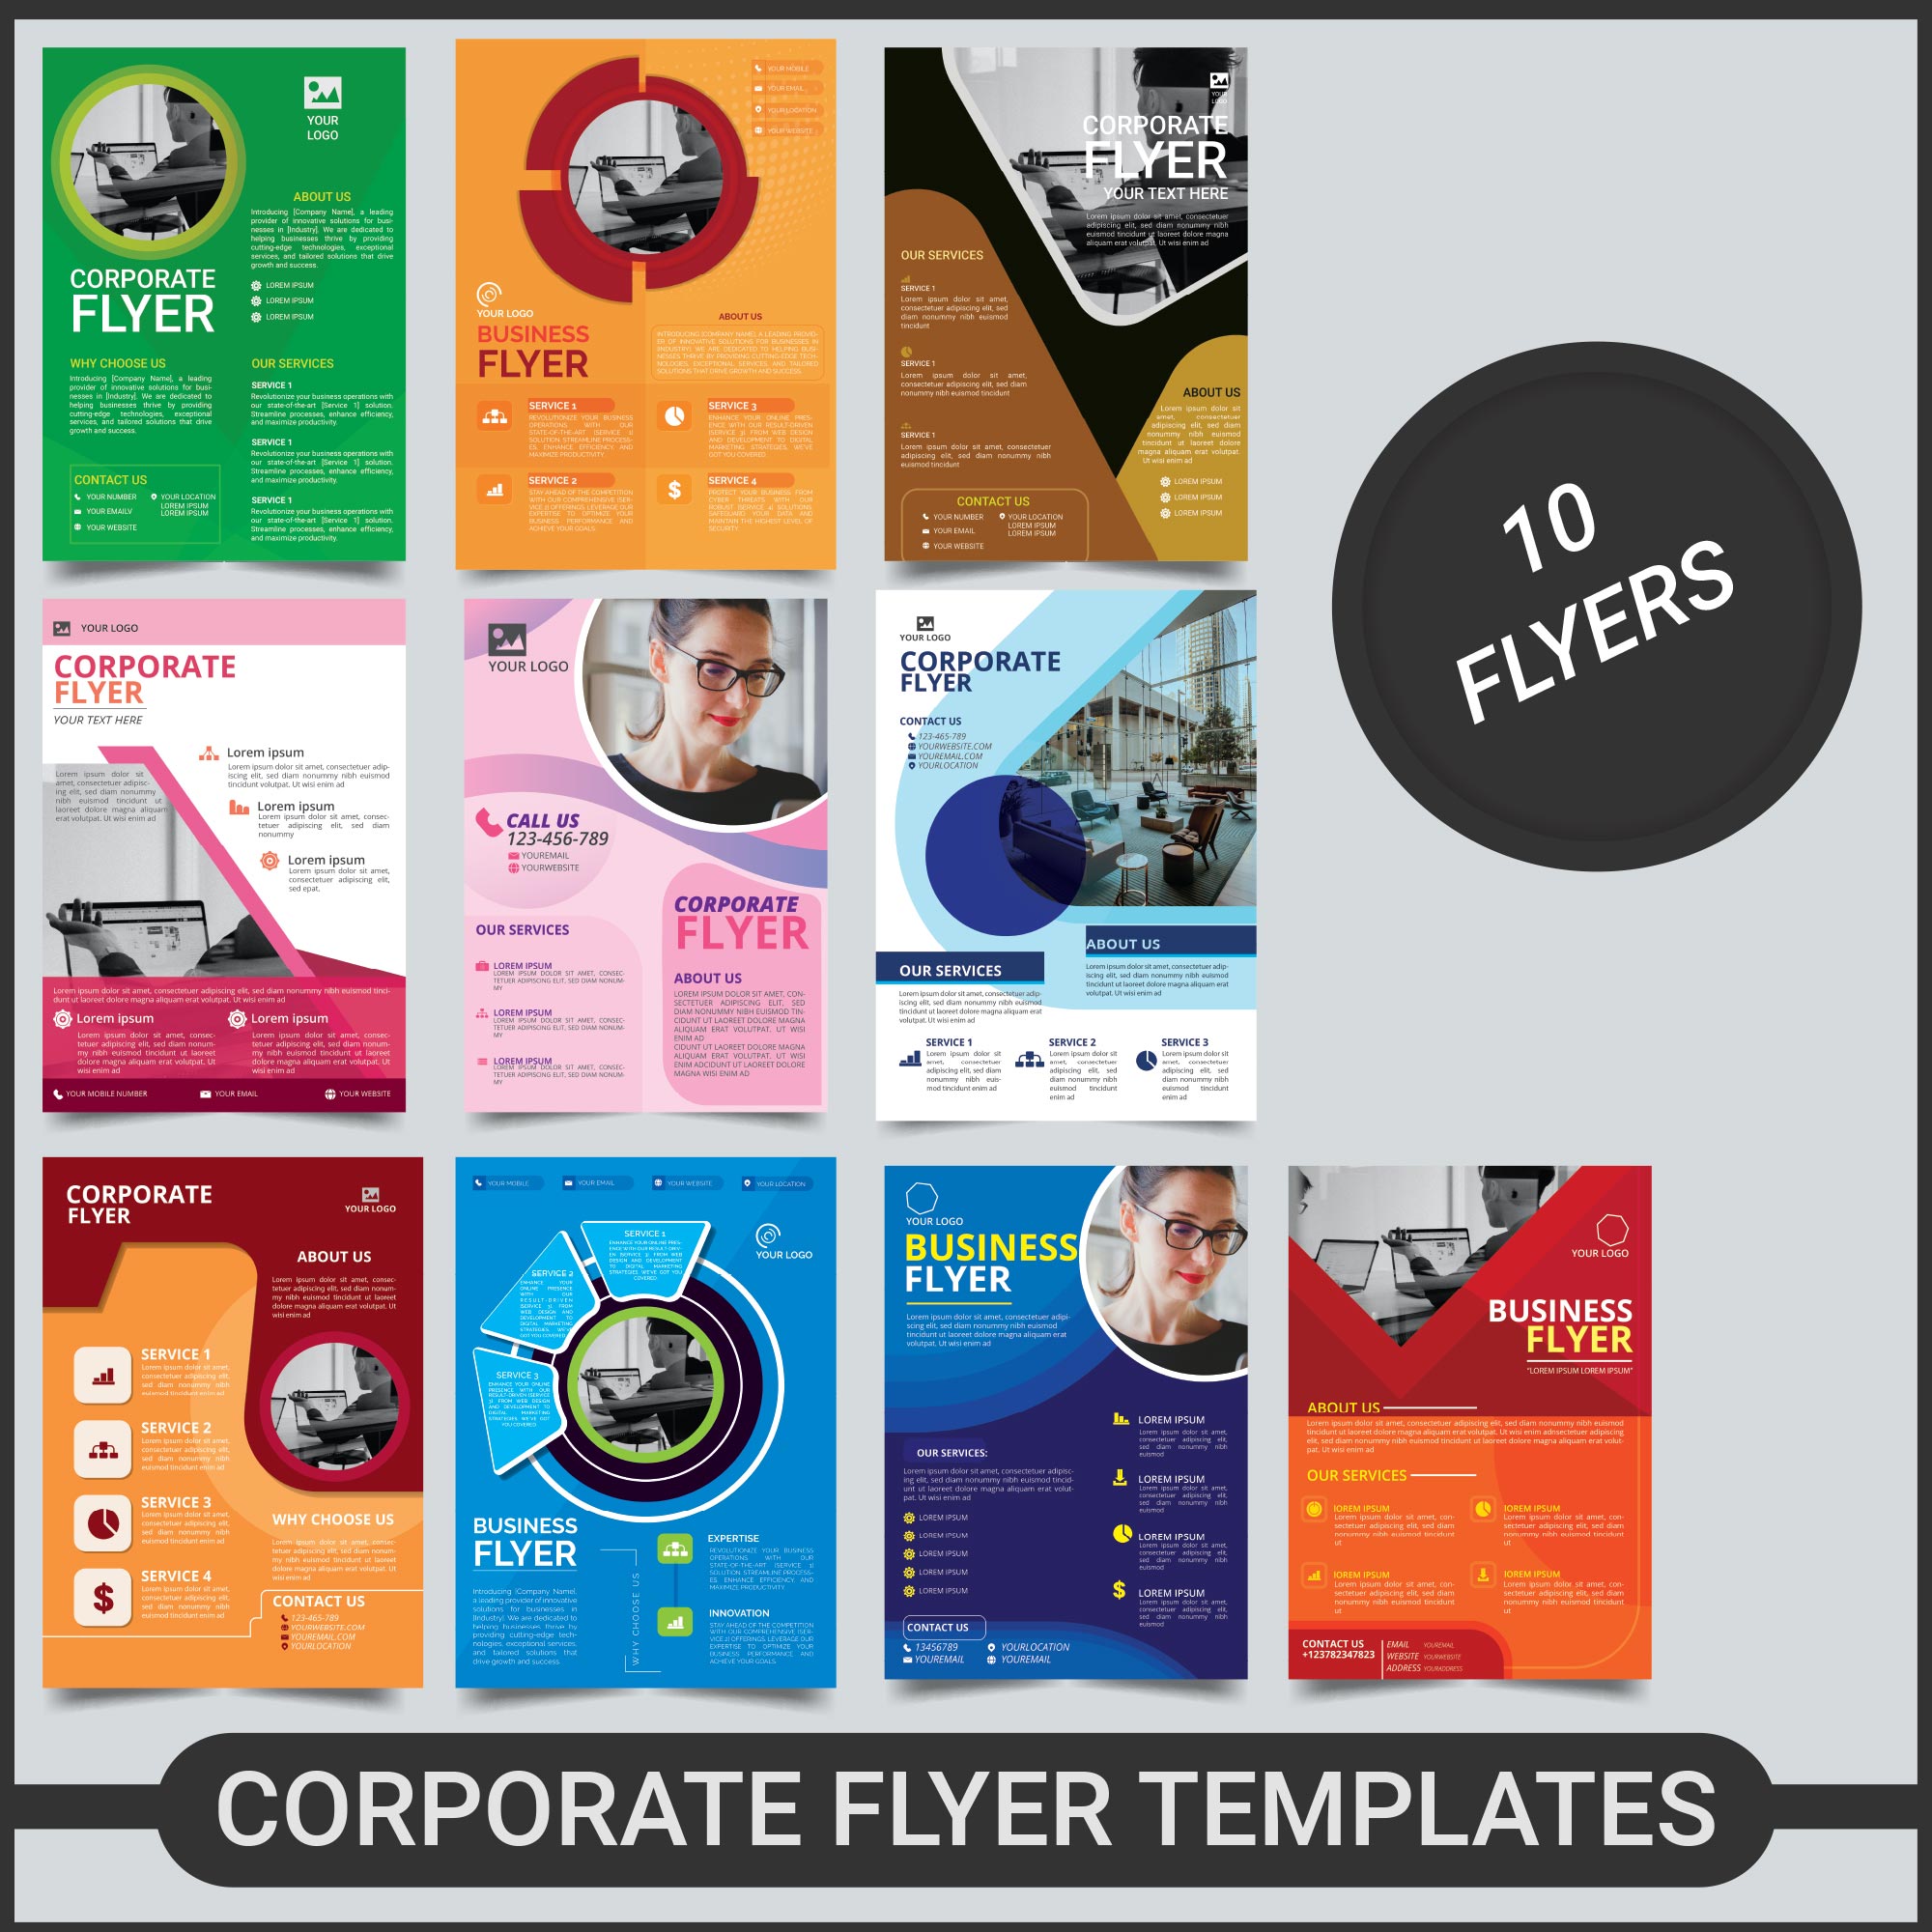 Corporate flyer templates cover image.